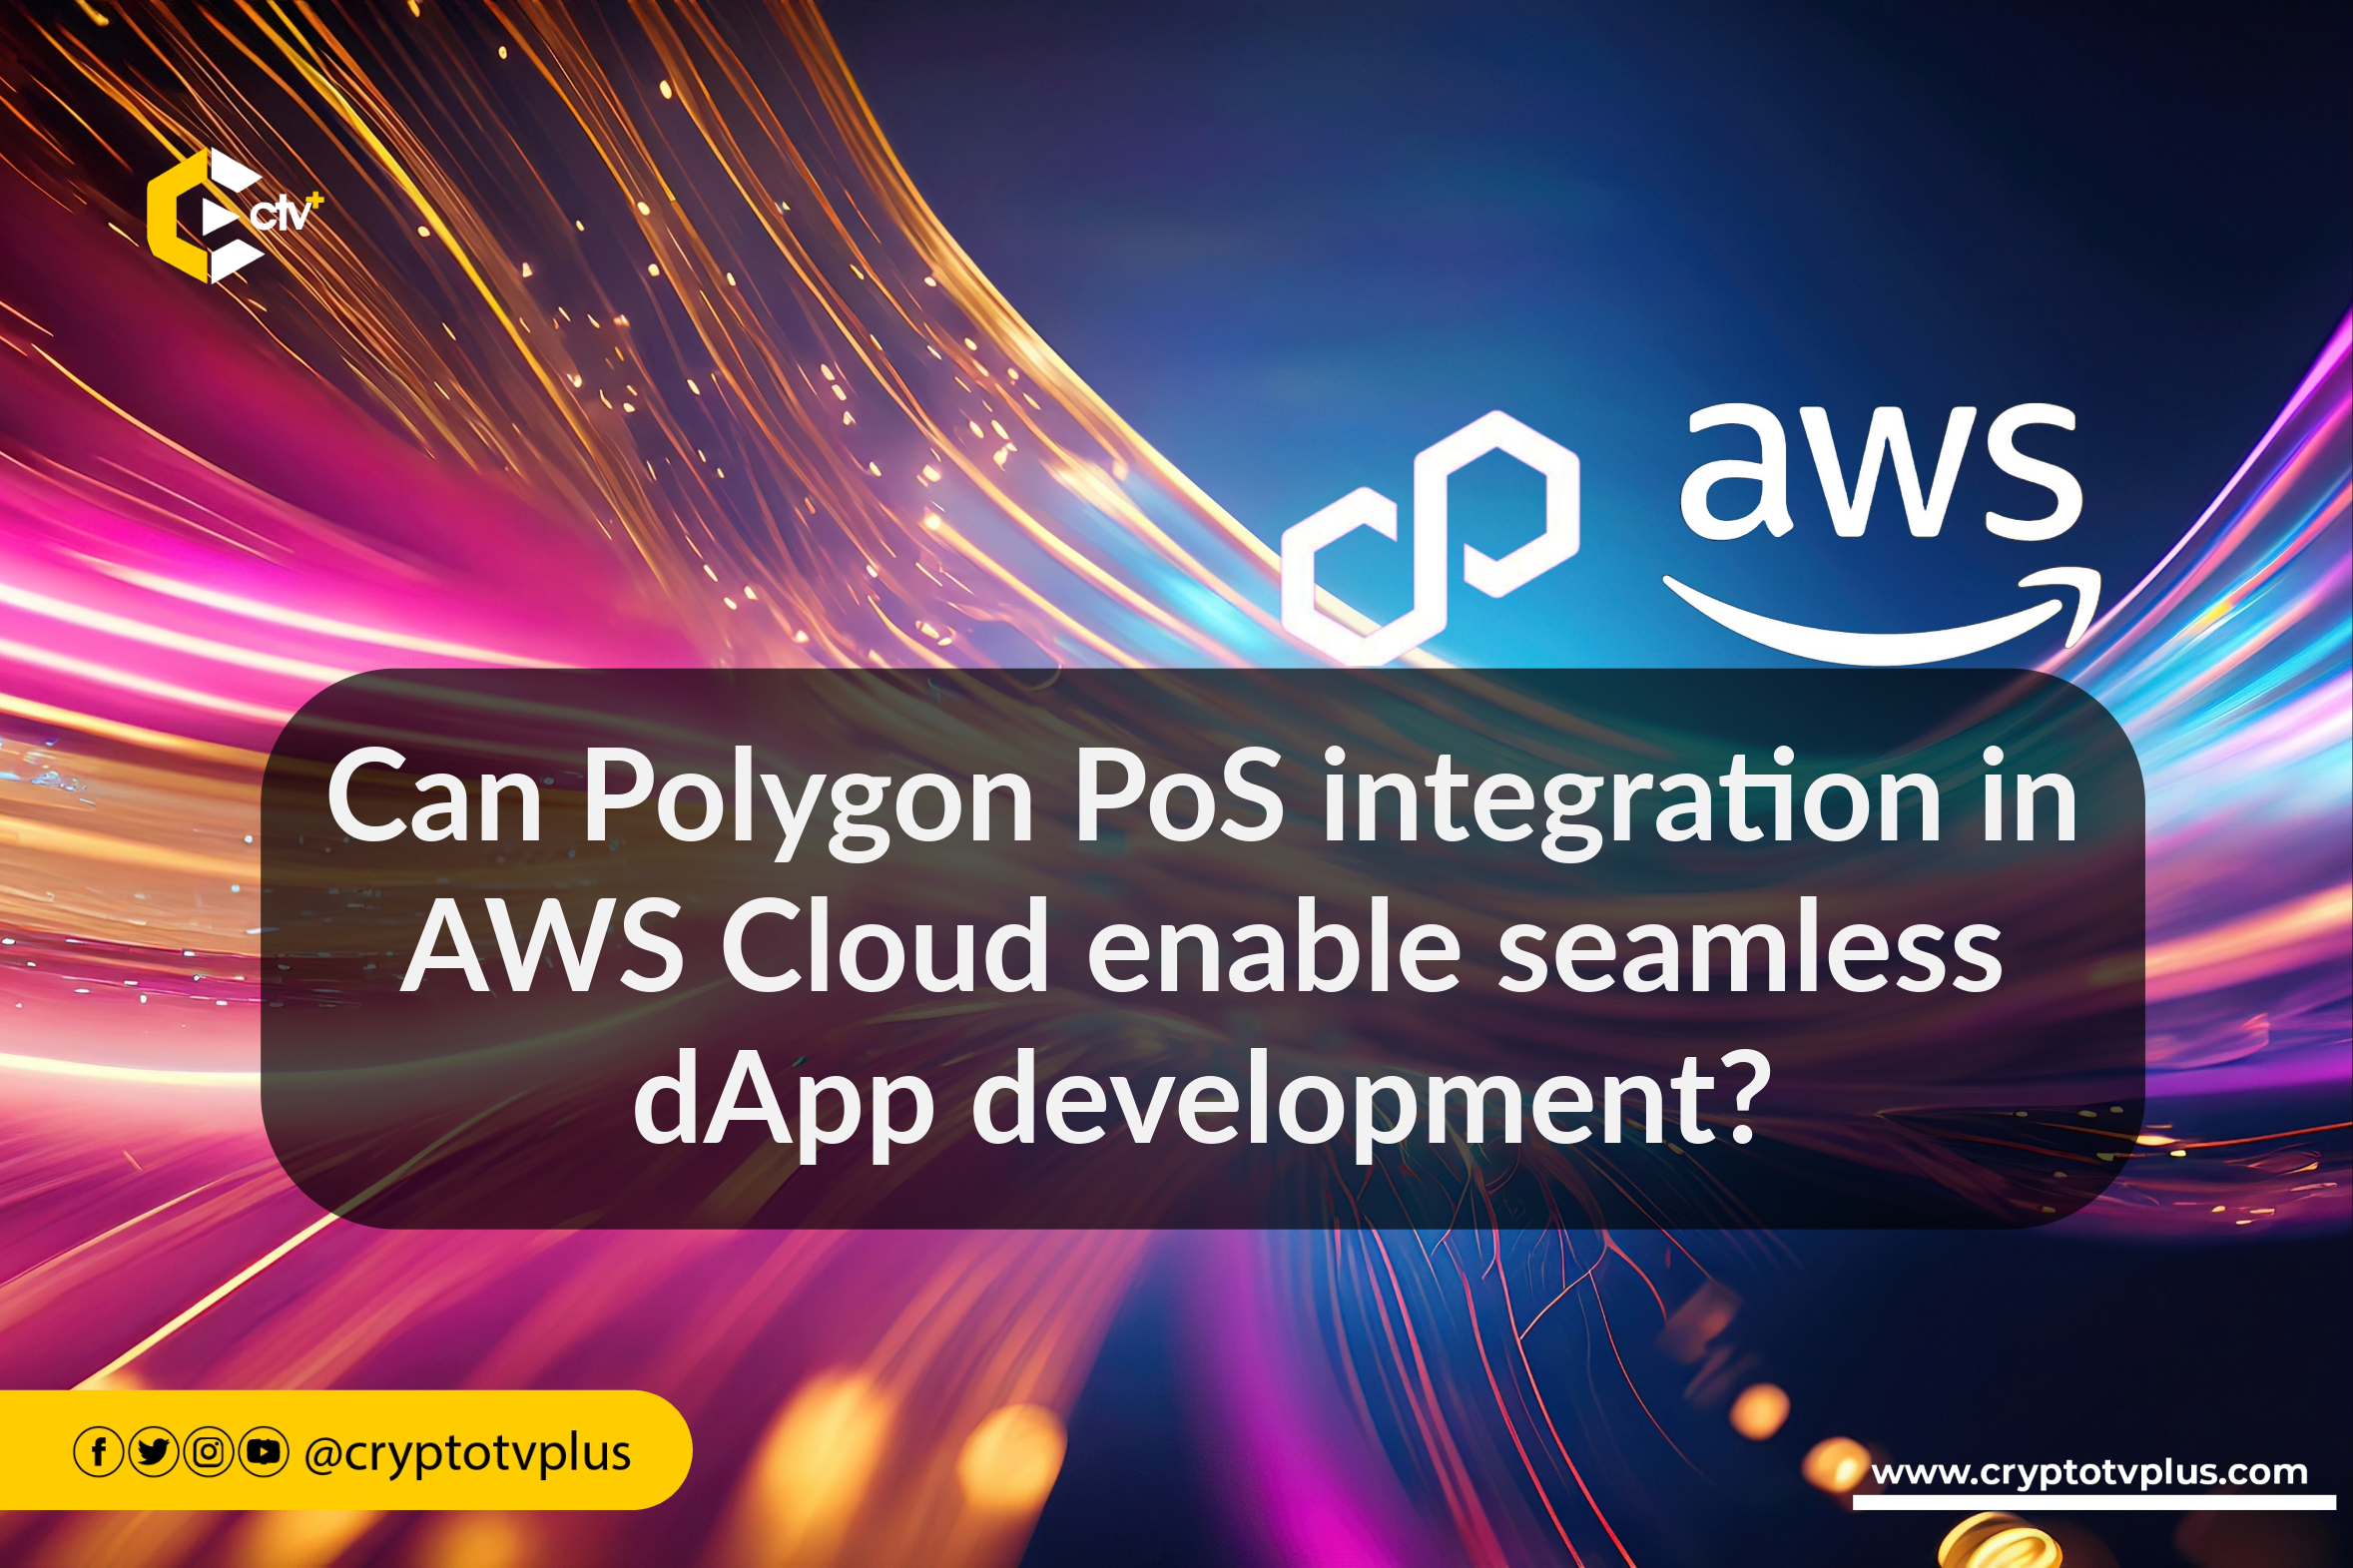 Discover how Amazon Web Service (AWS) Cloud integrates with Polygon to simplify dApp development. Explore Polygon PoS, AMB, and the benefits of leveraging AWS infrastructure. Amazon Web Service, Polygon, dApp development, blockchain infrastructure